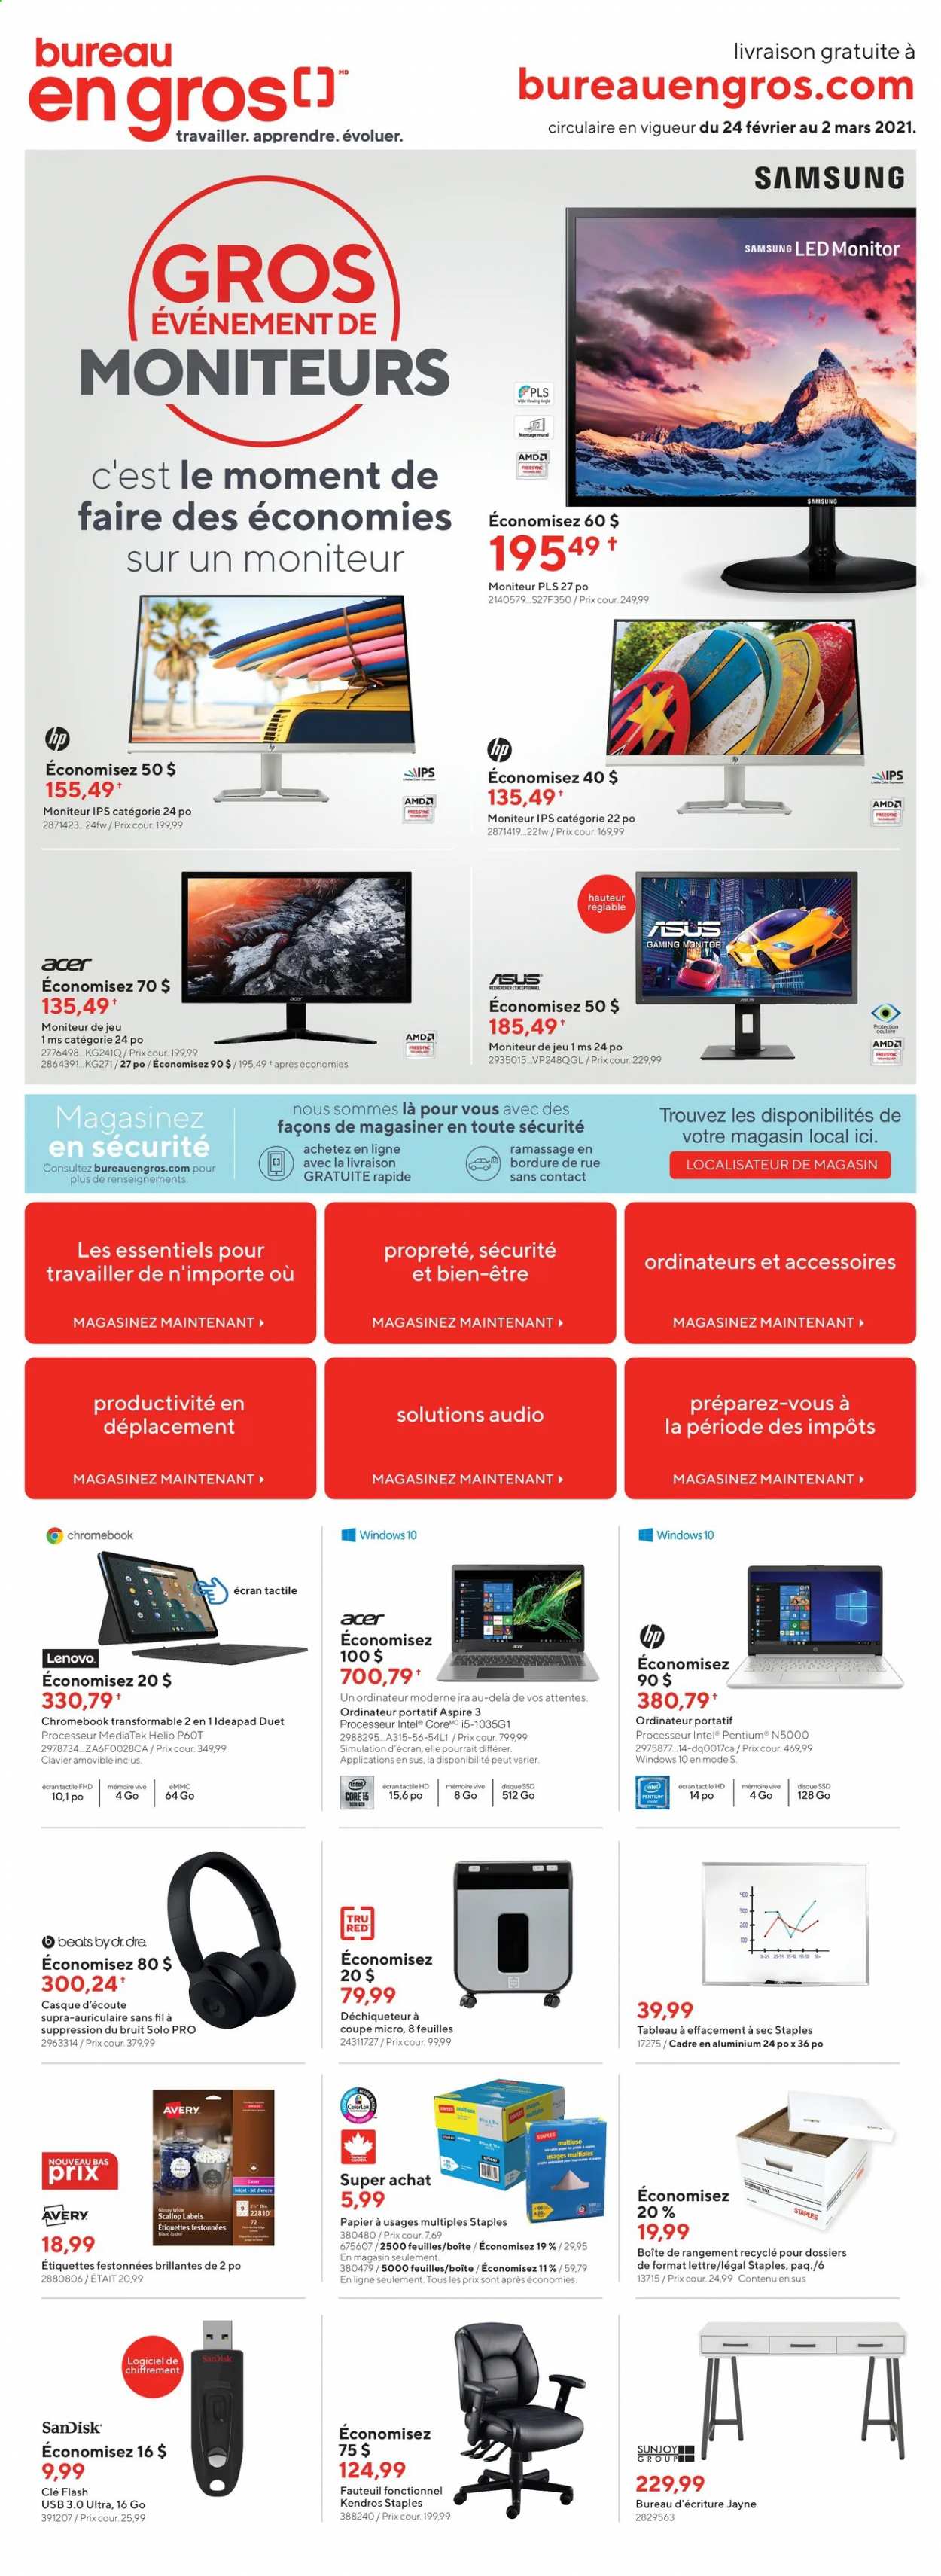 thumbnail - Bureau en Gros Flyer - February 24, 2021 - March 02, 2021 - Sales products - Intel, Acer, Hewlett Packard, Samsung, Sandisk, chromebook, Lenovo, monitor. Page 1.